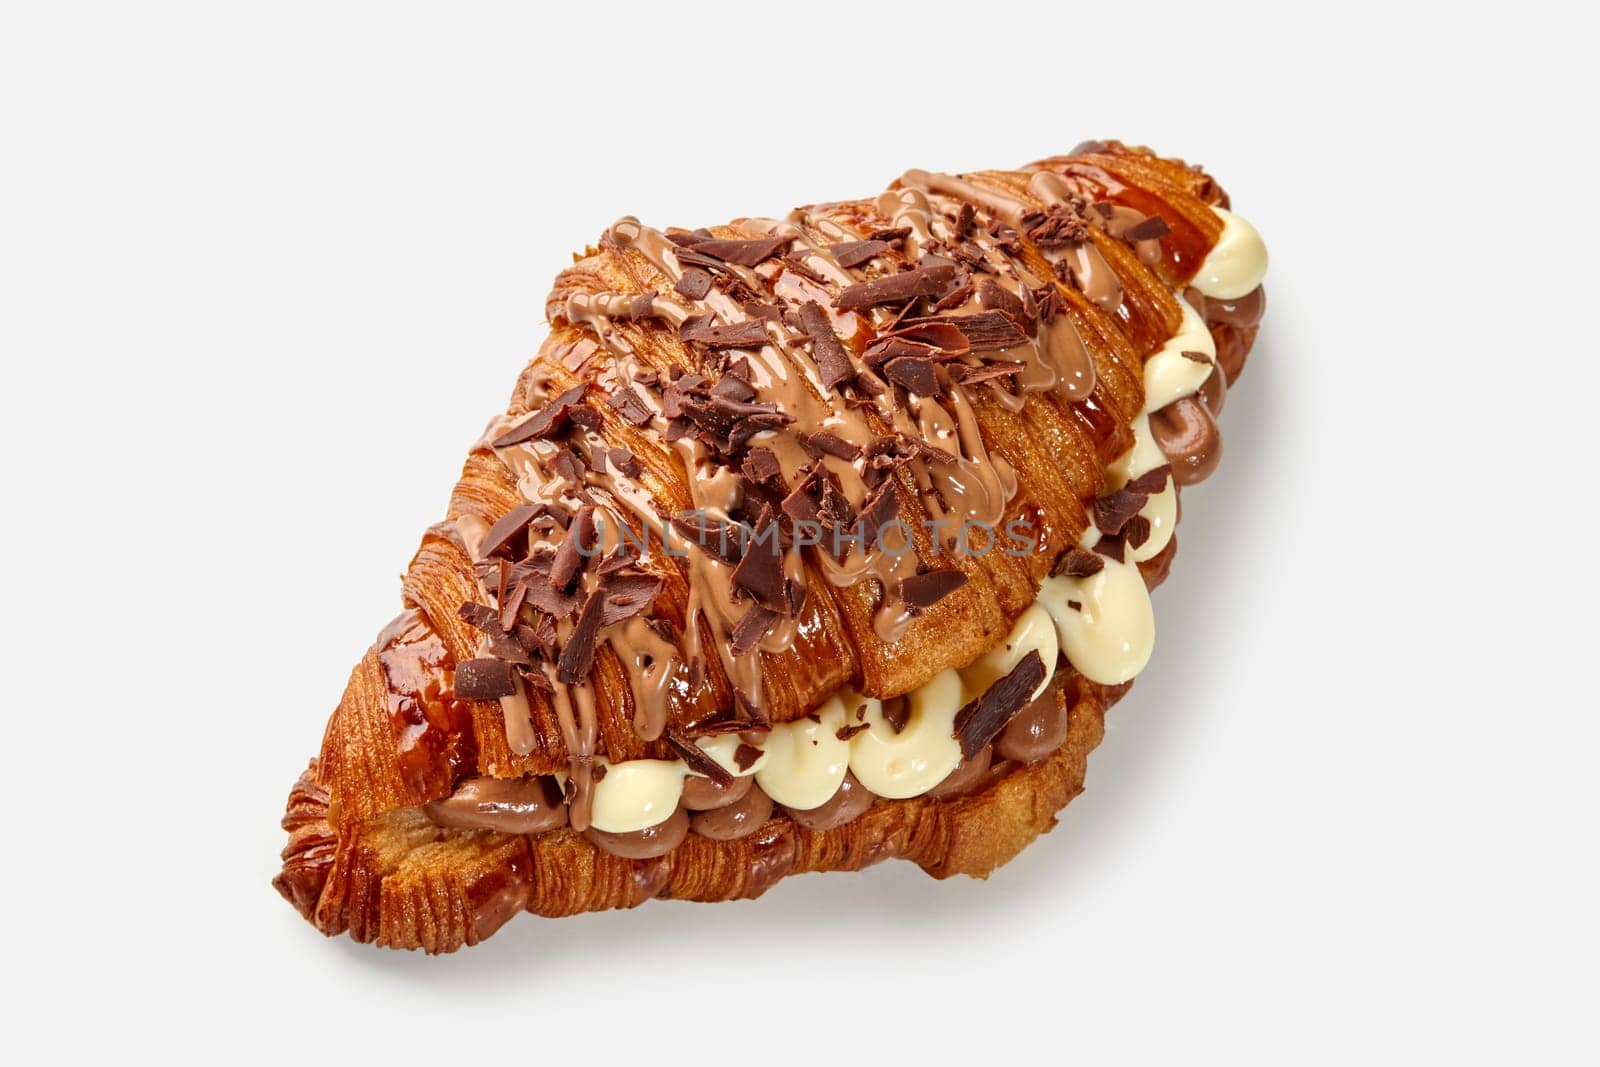 Closeup of gourmet fluffy croissant sandwich with rich creamy filling and chocolate shavings on white background. Delicious French style pastries